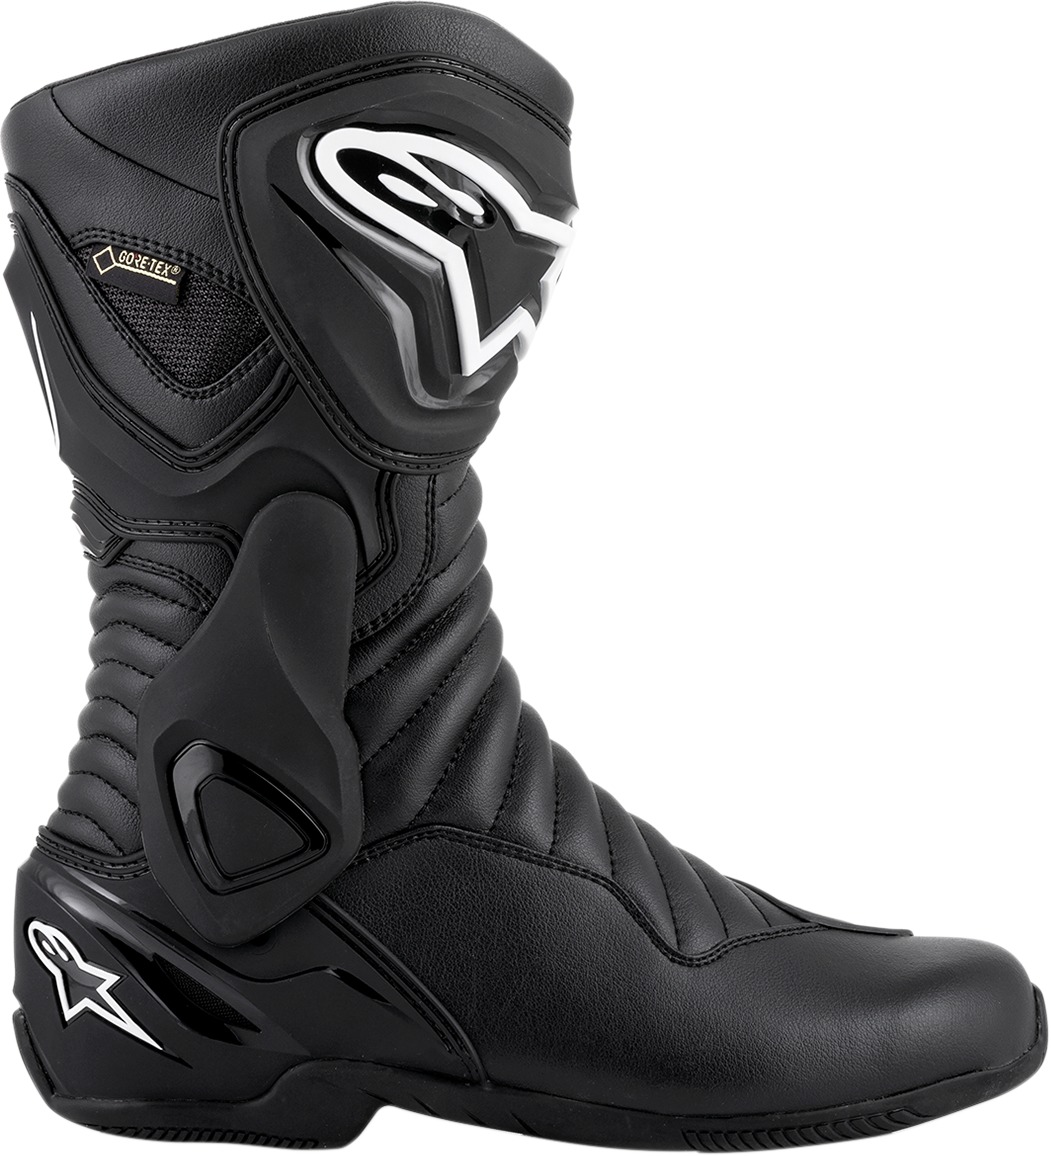 SMX-6 GTX Street Riding Boots Black US 8 - Click Image to Close